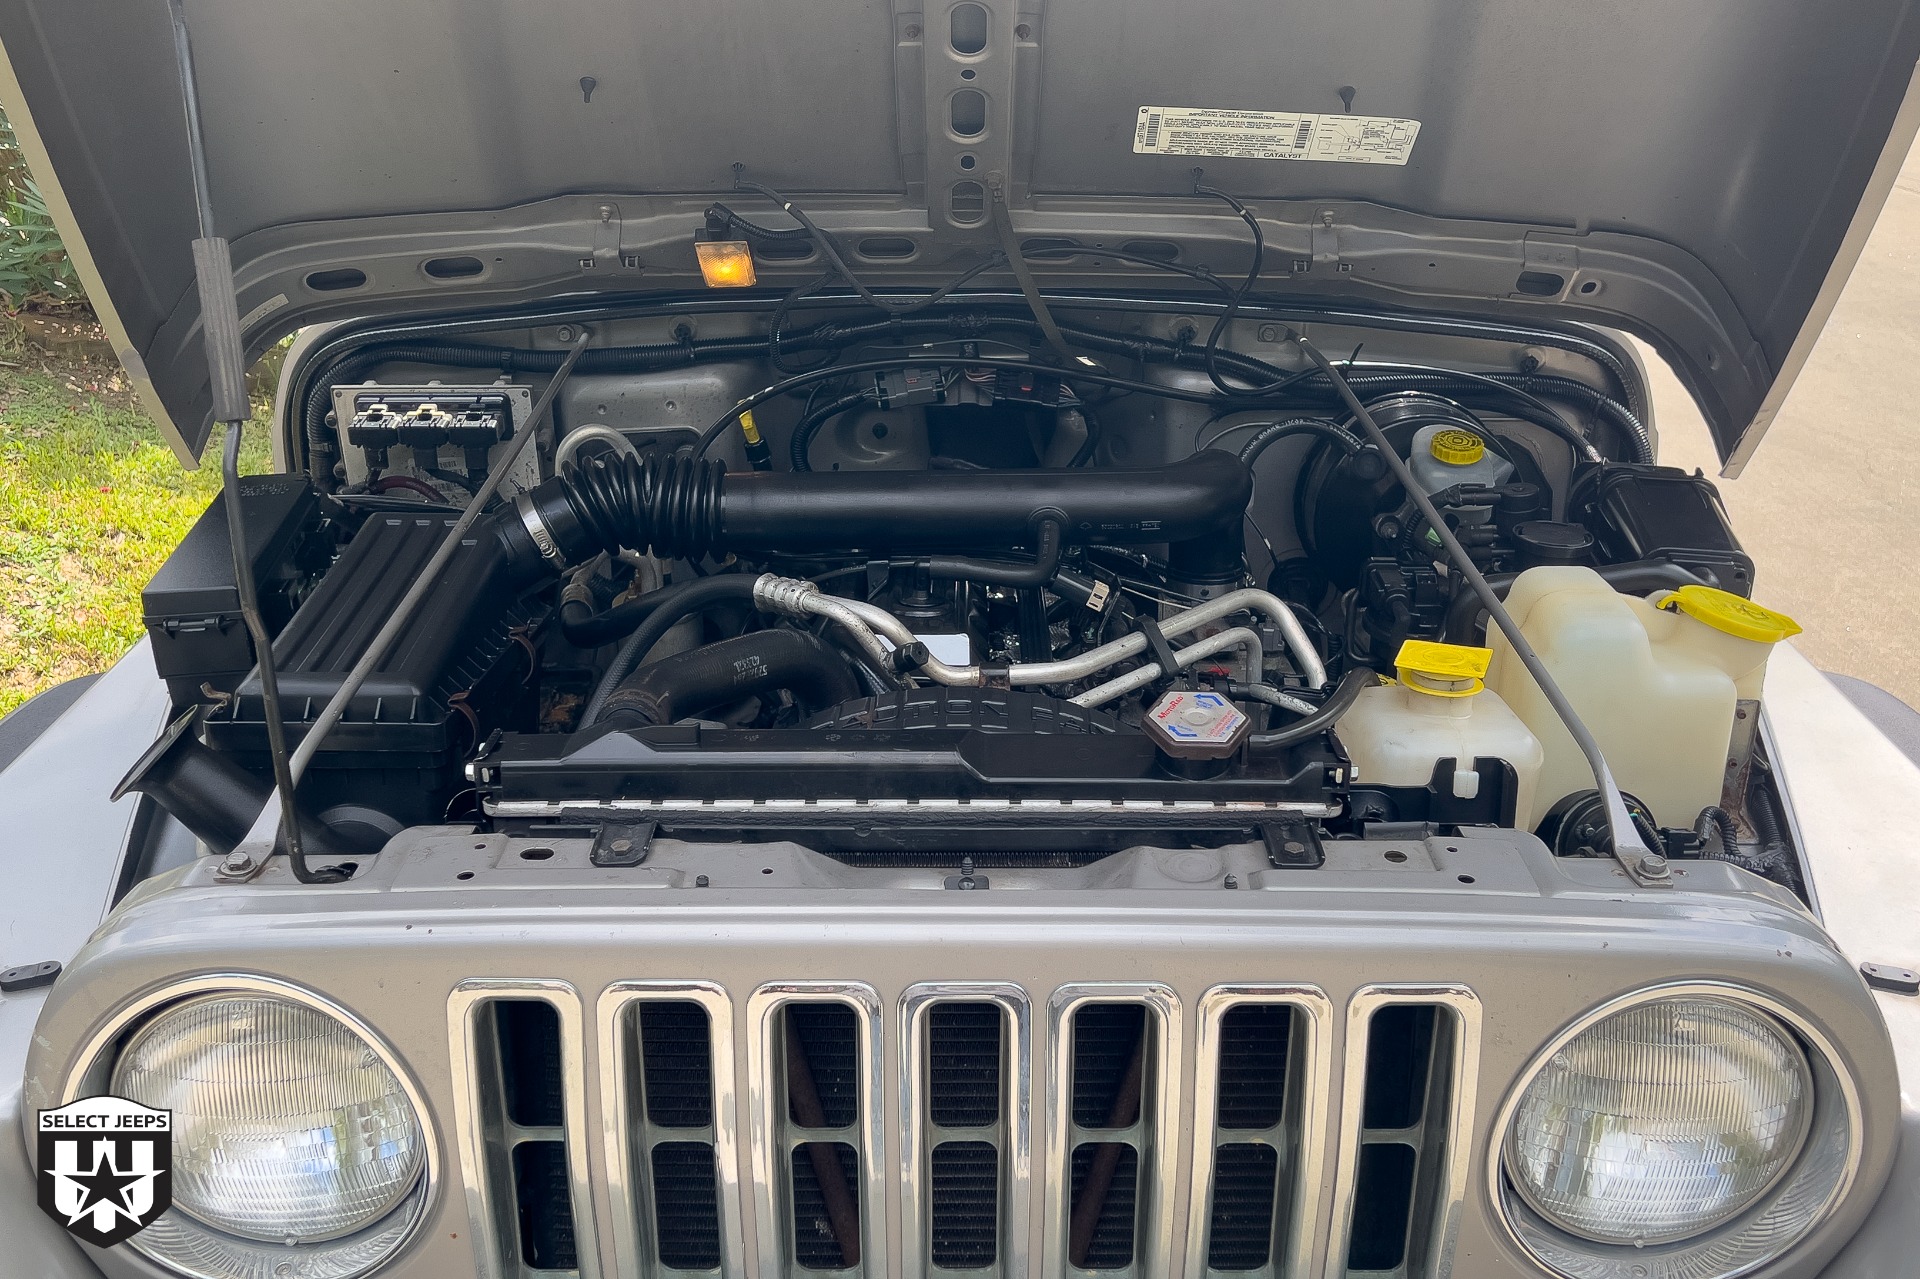 Used 2001 Jeep Wrangler Sport For Sale ($17,995) | Select Jeeps Inc. Stock  #362414